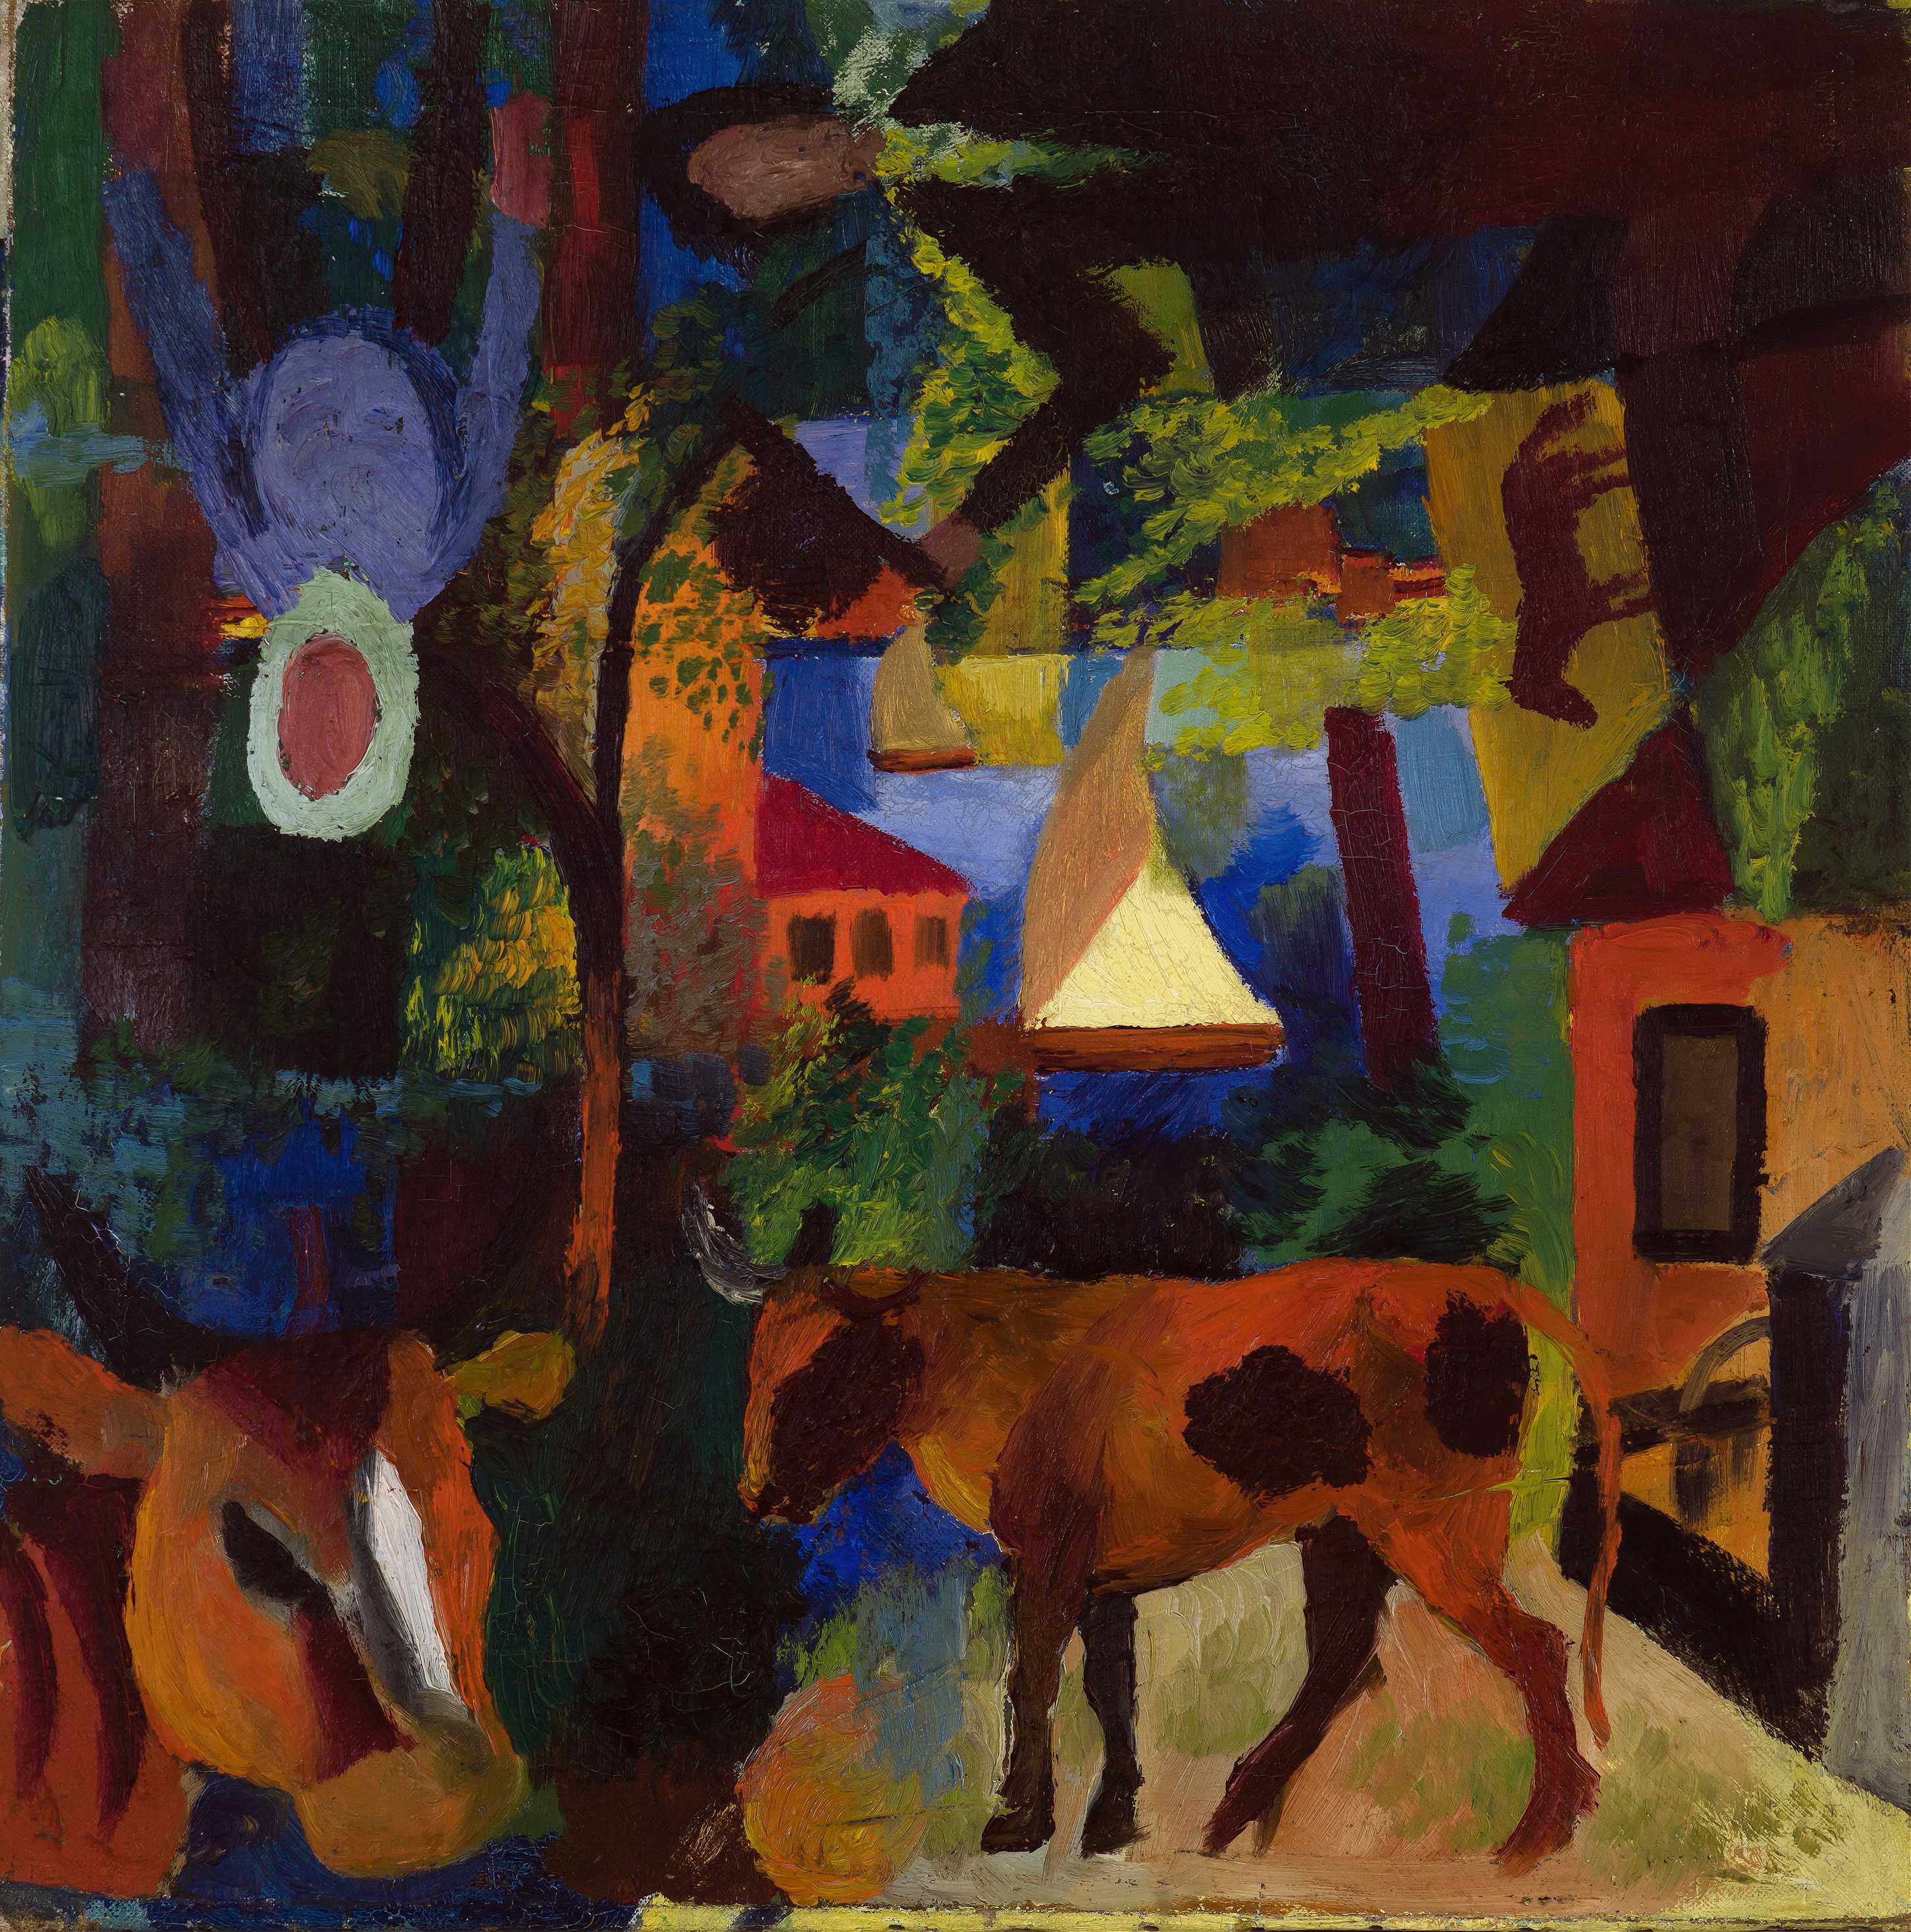 Find out more about August Macke - Landscape with Cows, Sailboat, and Figures